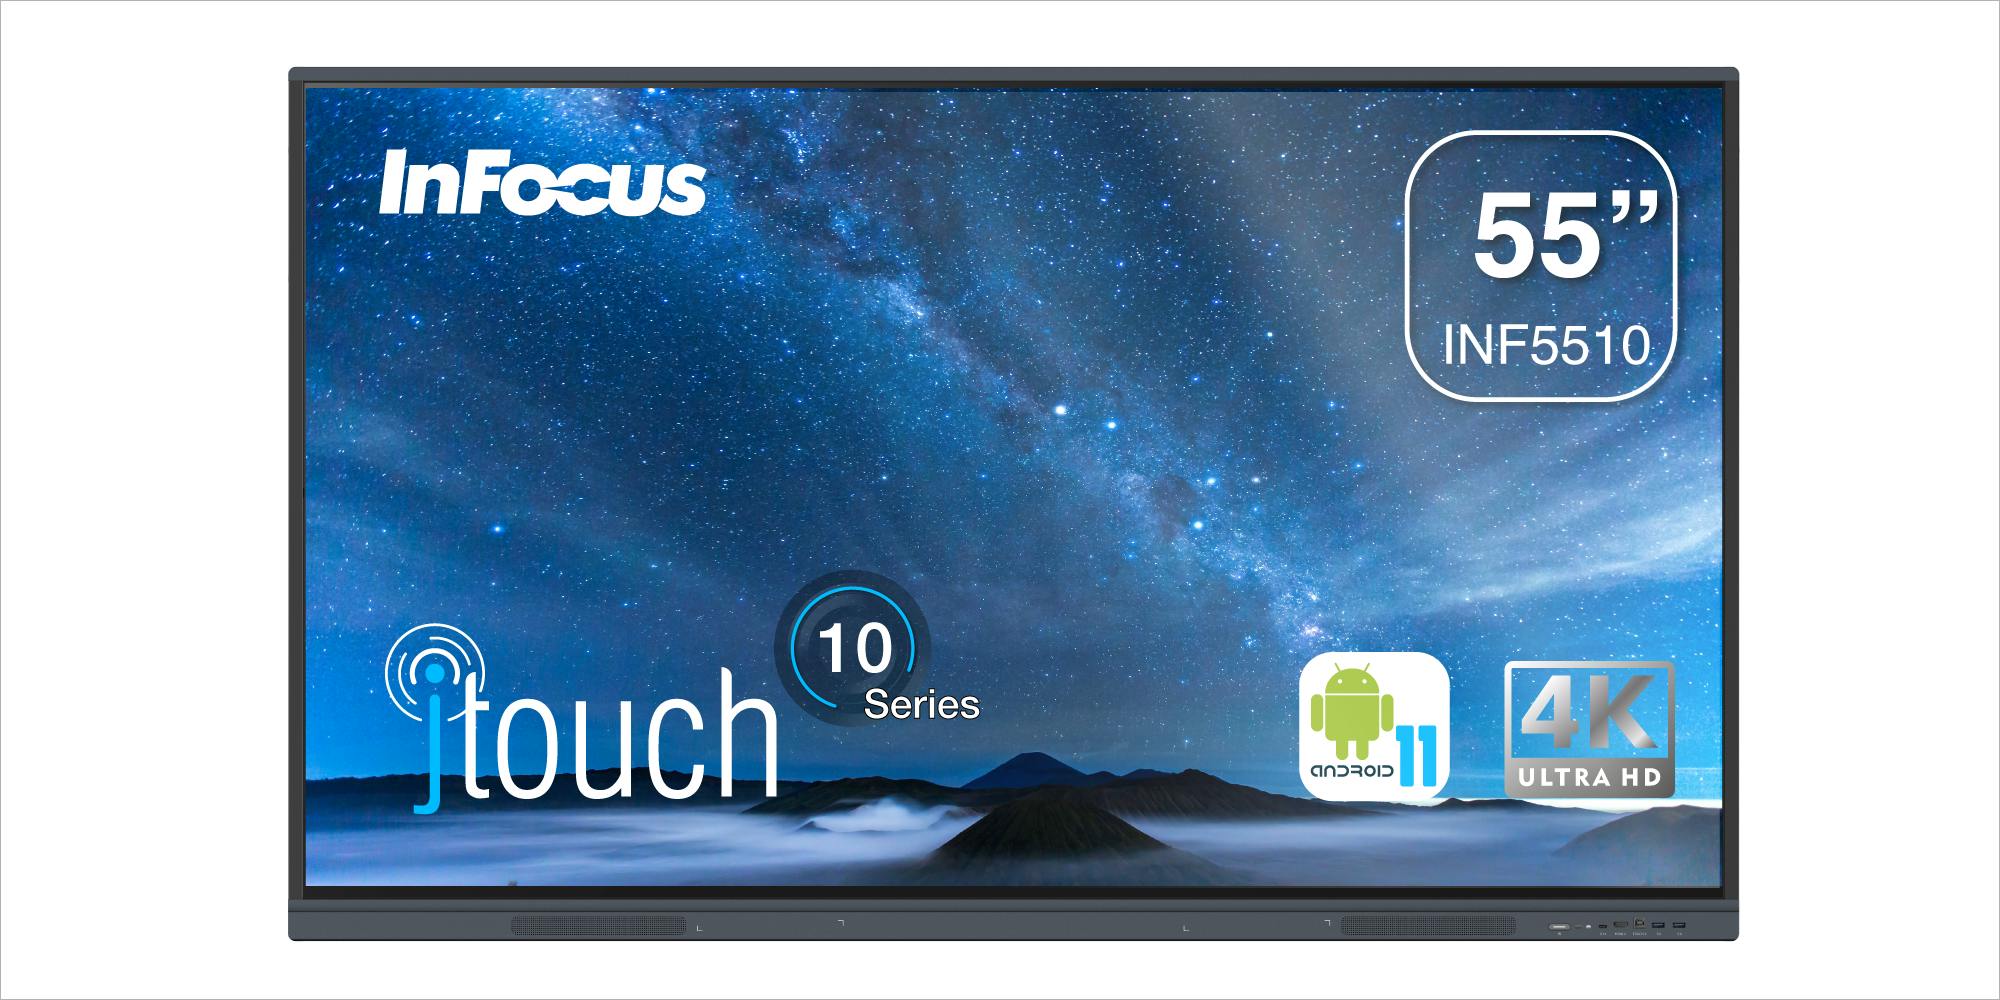 JTouch 10 Series - INF5510